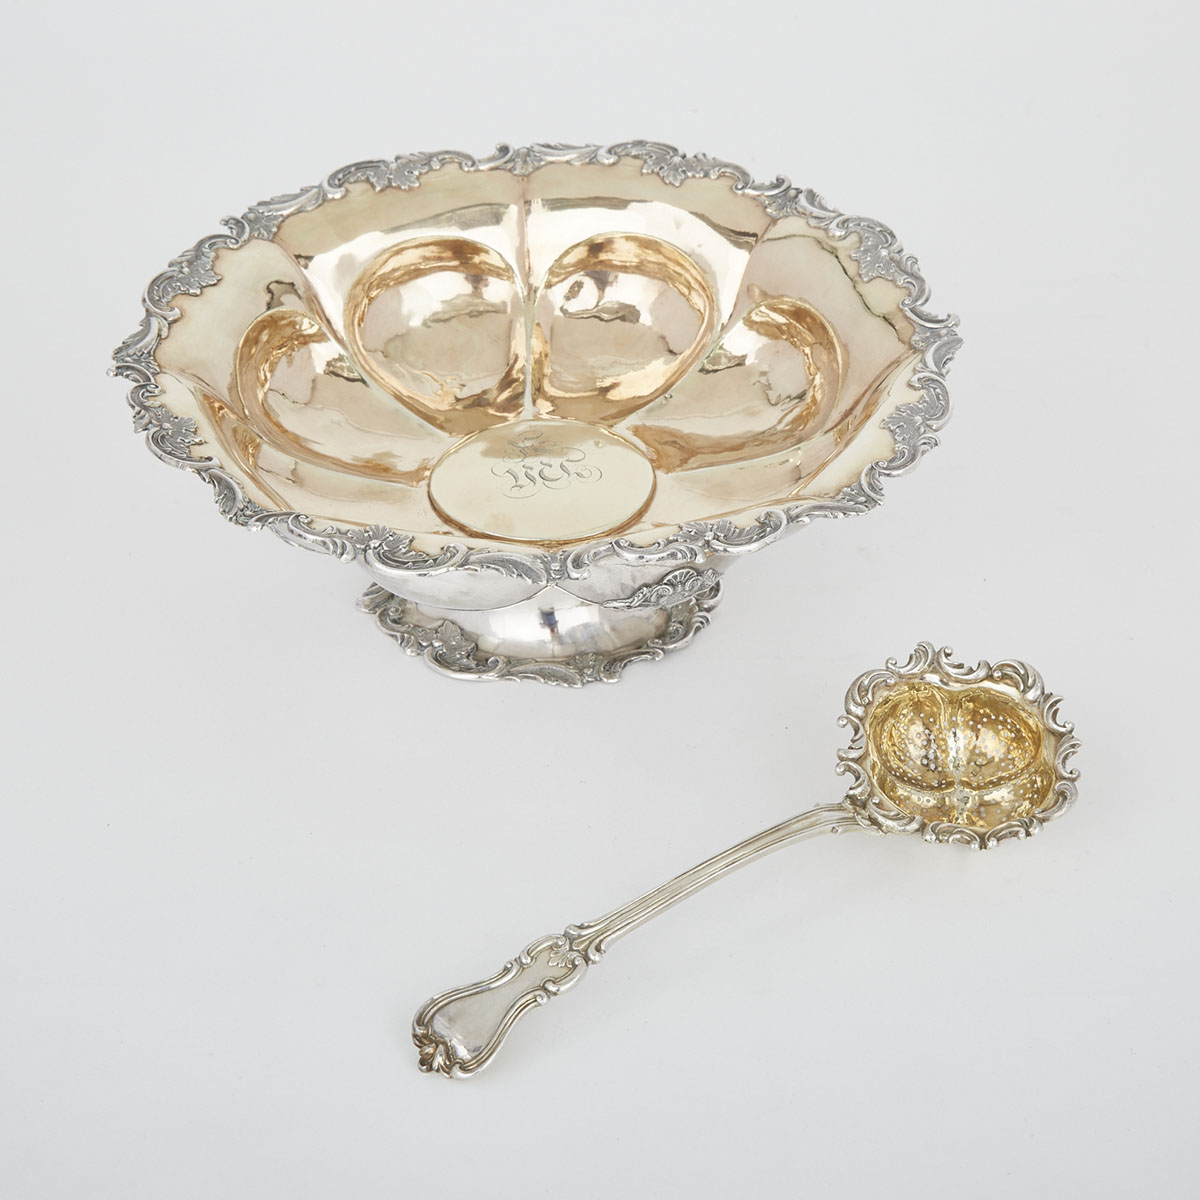 Russian Silver Parcel-Gilt Footed Bowl, Moscow, 1843 and a Pierced Ladle, St. Petersburg, 1841